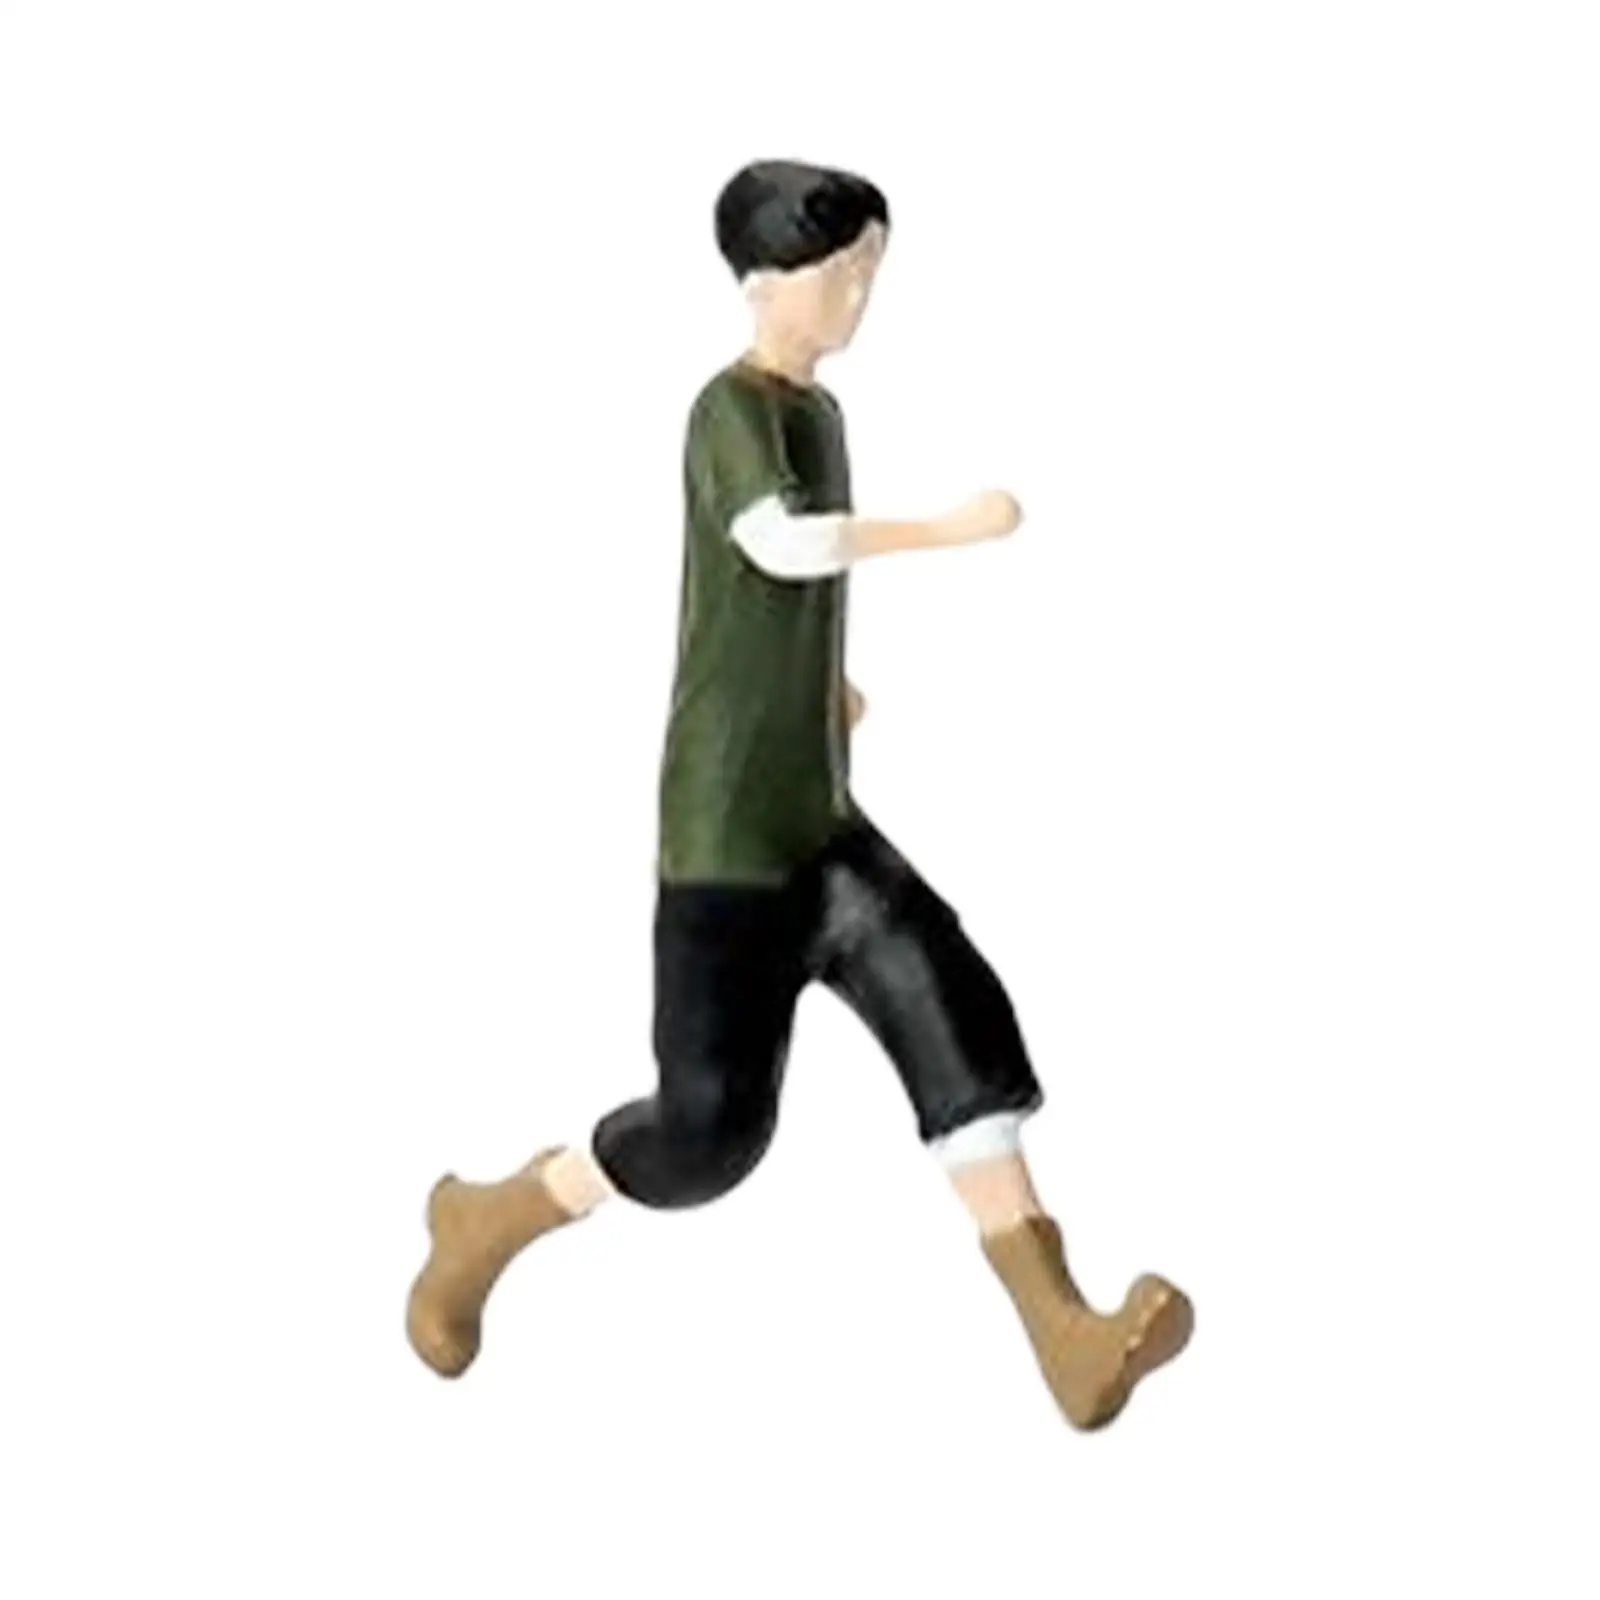 Miniature 1/64 Models People Figures Tiny Running Boy DIY Crafts for Micro Landscapes Sand Table Decor Collectibles Accessories